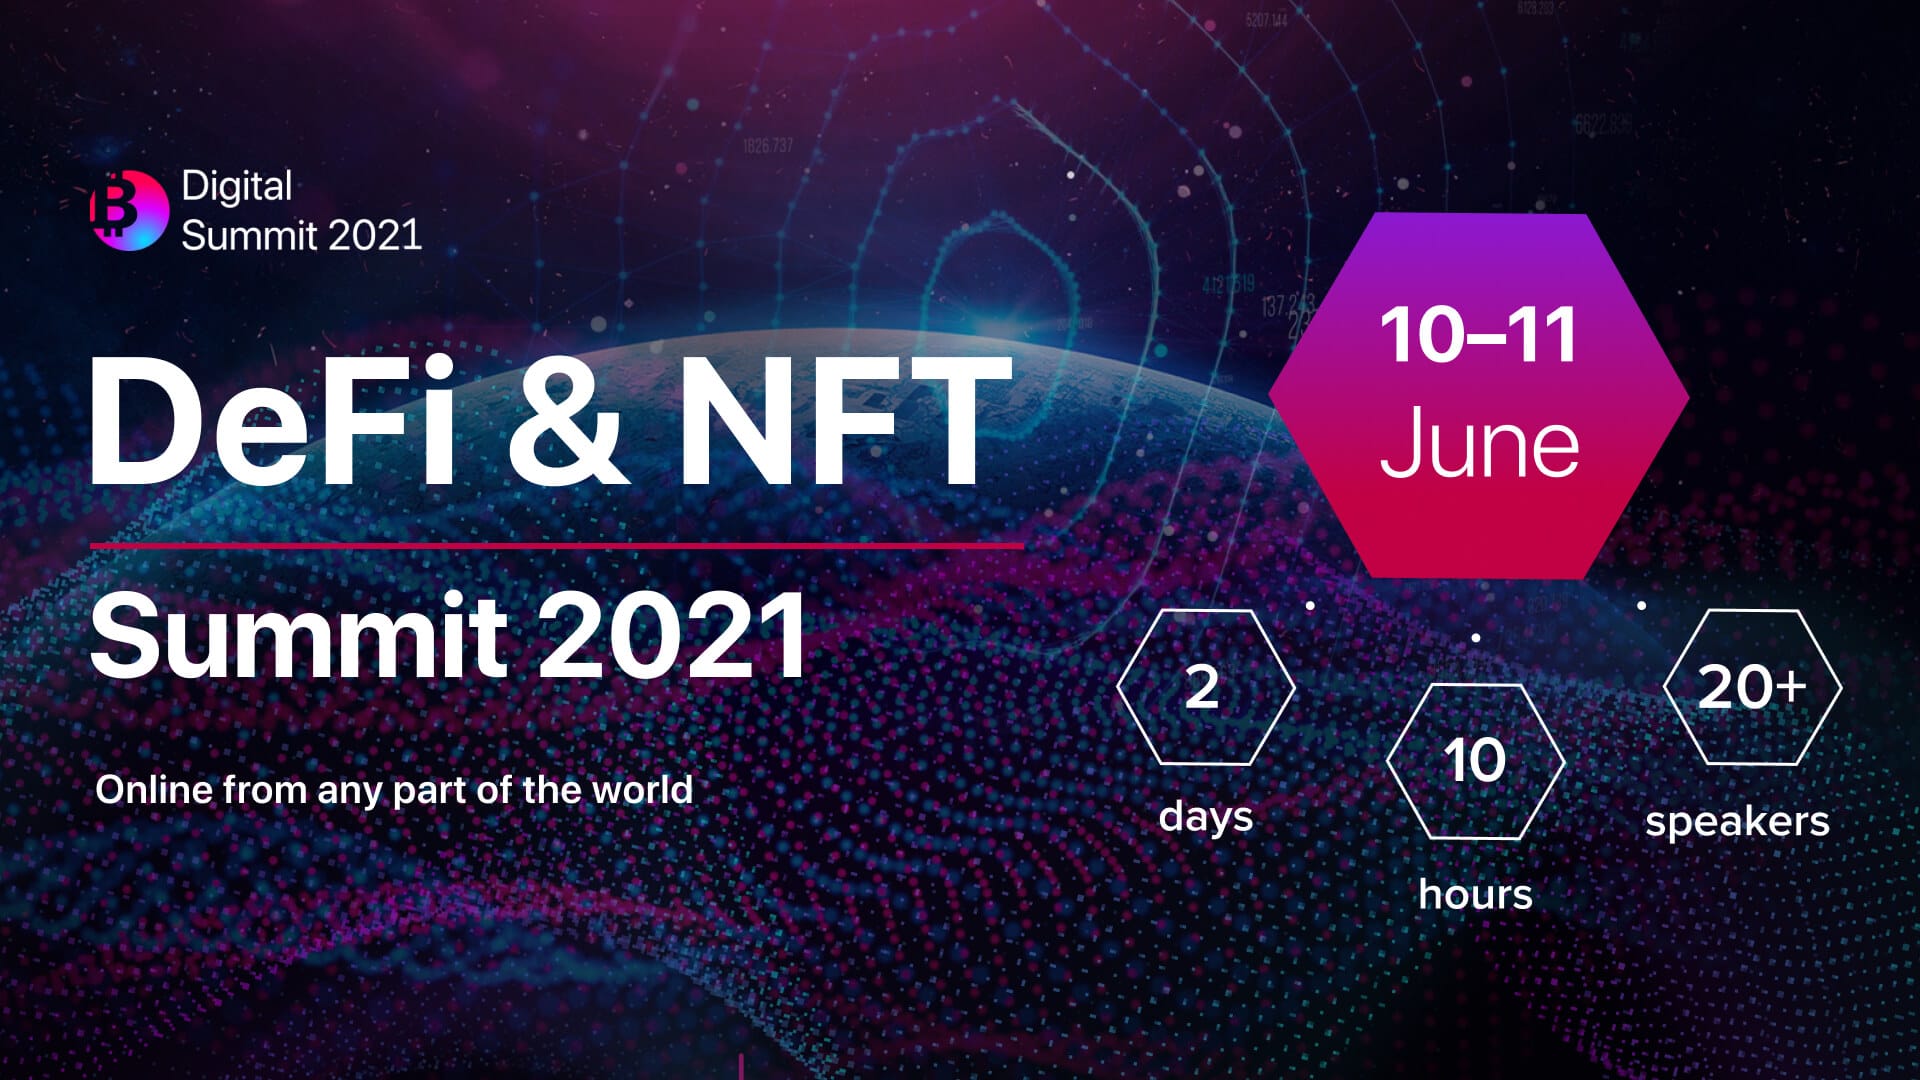 DeFi & NFT Summit will Bring Together 16+ Top Experts on June, 10-11